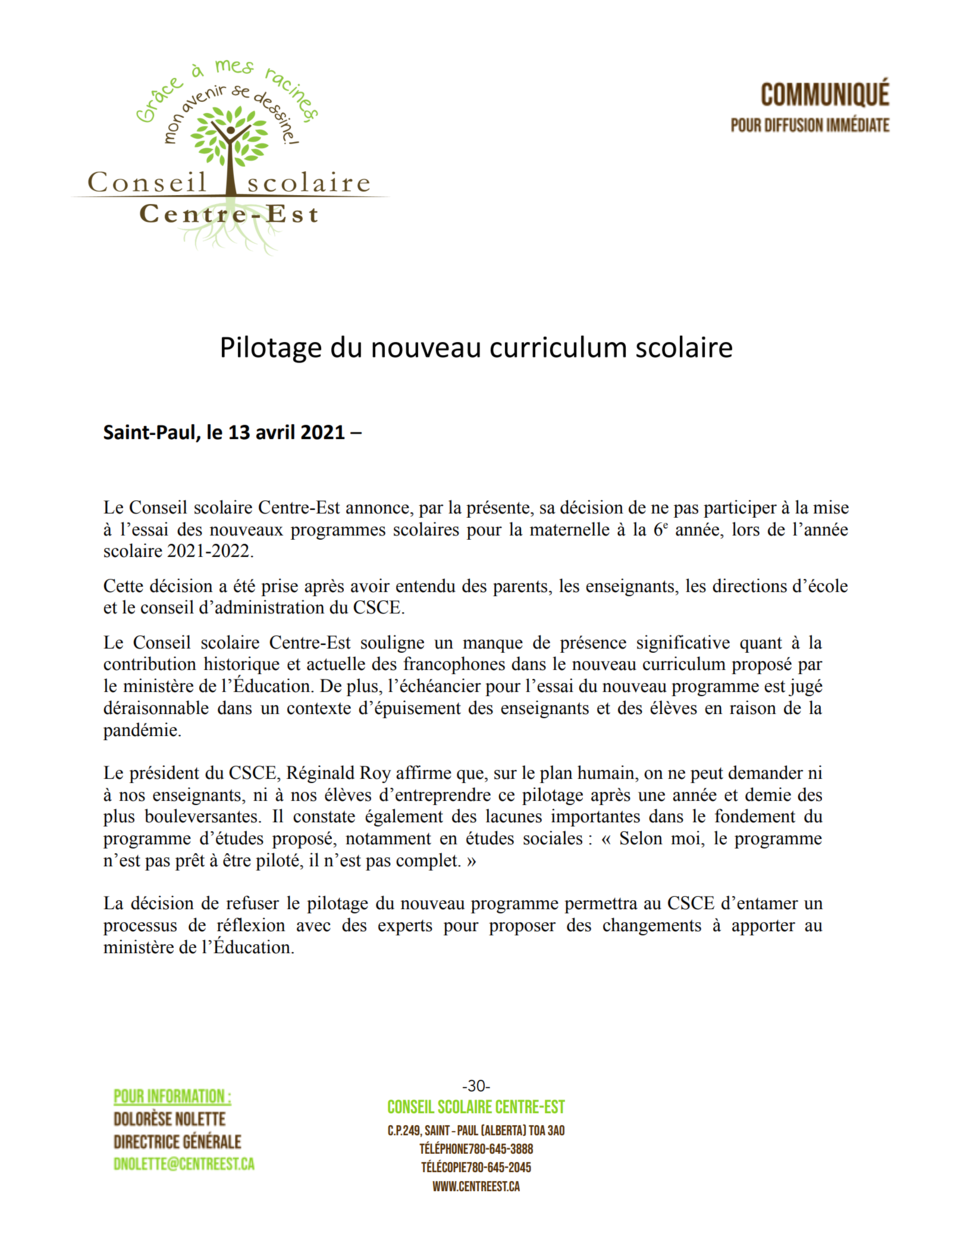 French CSCE statement